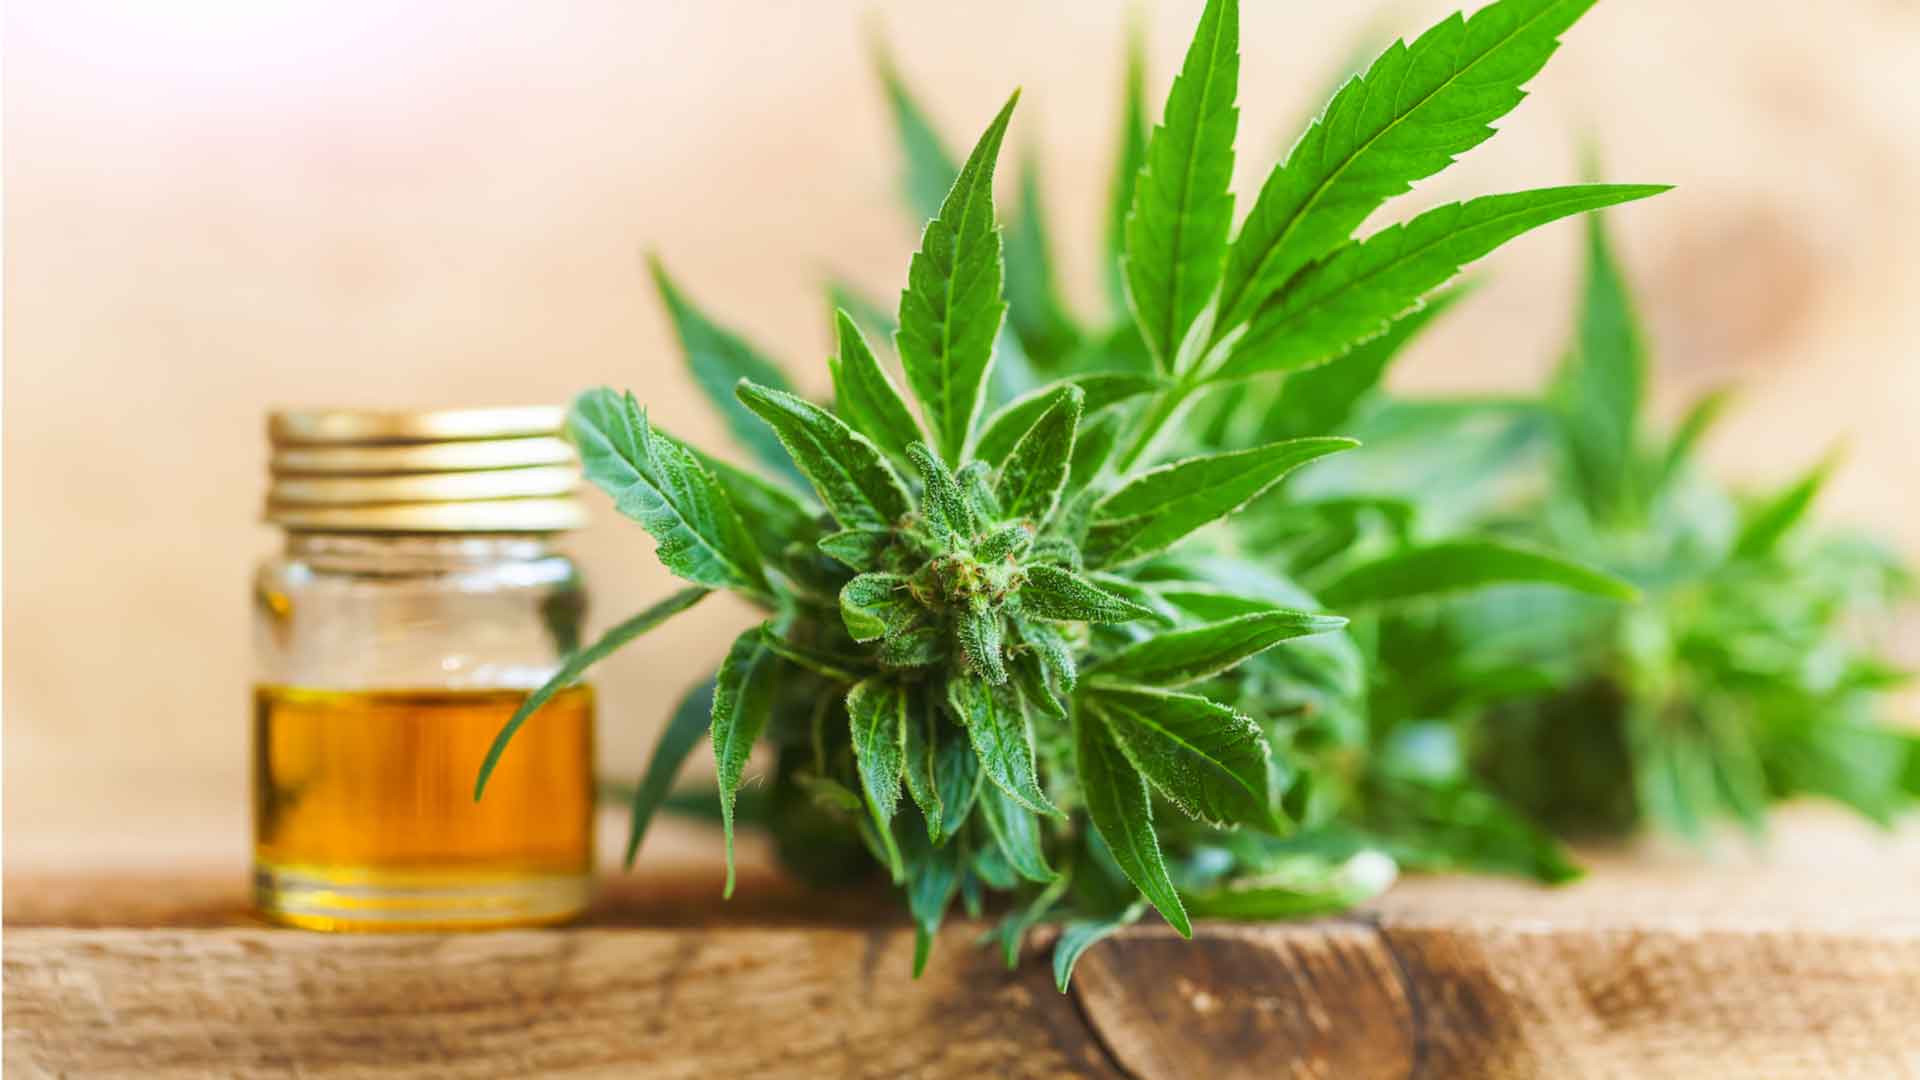 Why Should One Buy CBD Flowers Online?